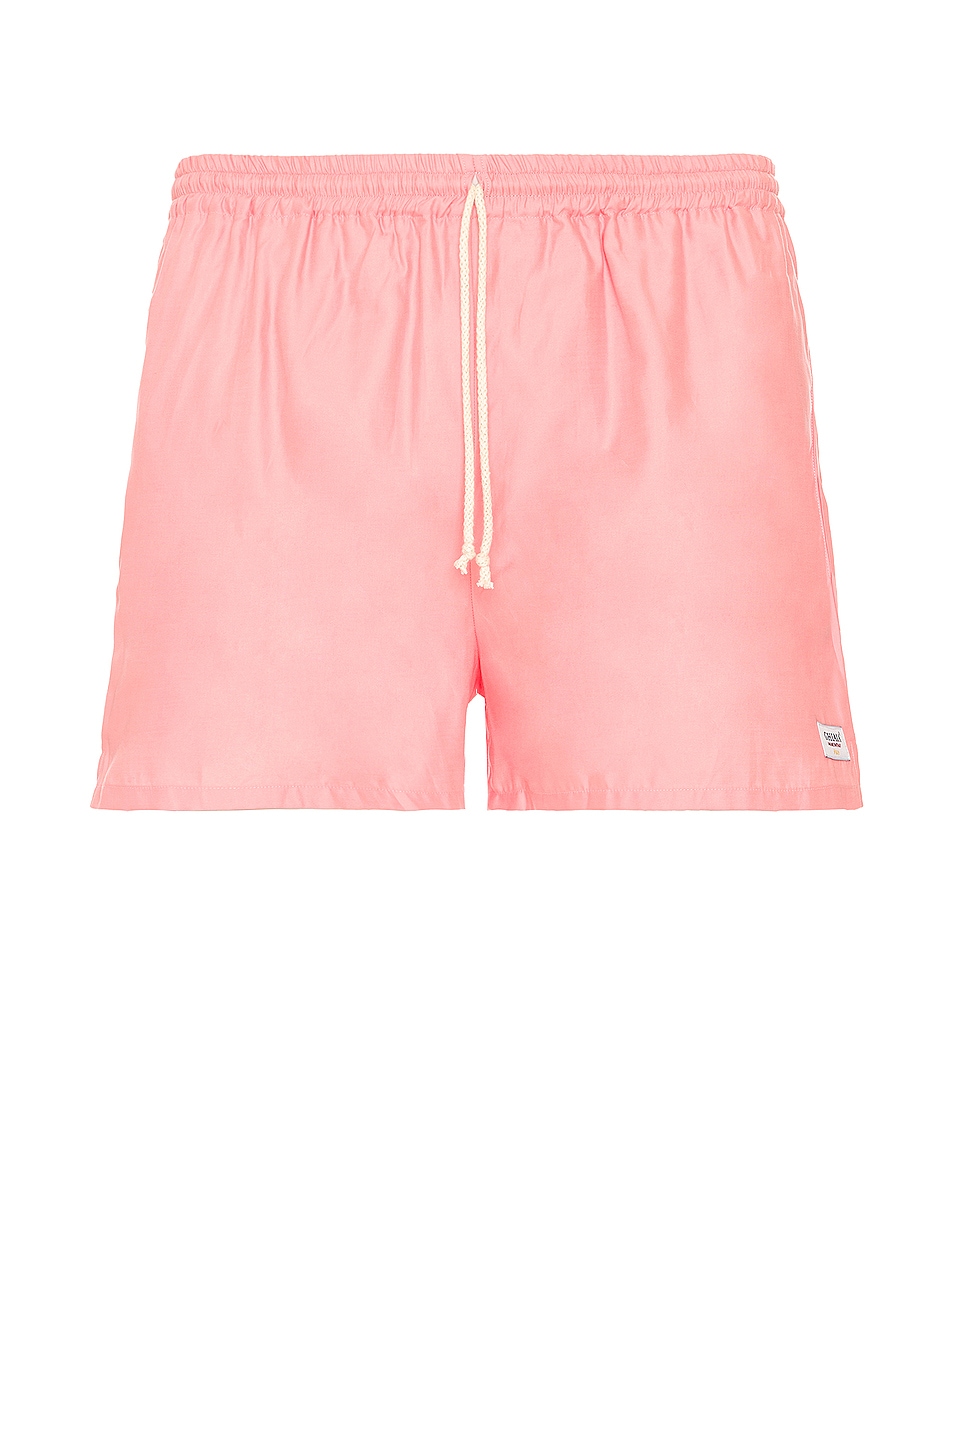 Image 1 of Ghiaia Cashmere Cotton Mare Swim Shorts in Pink